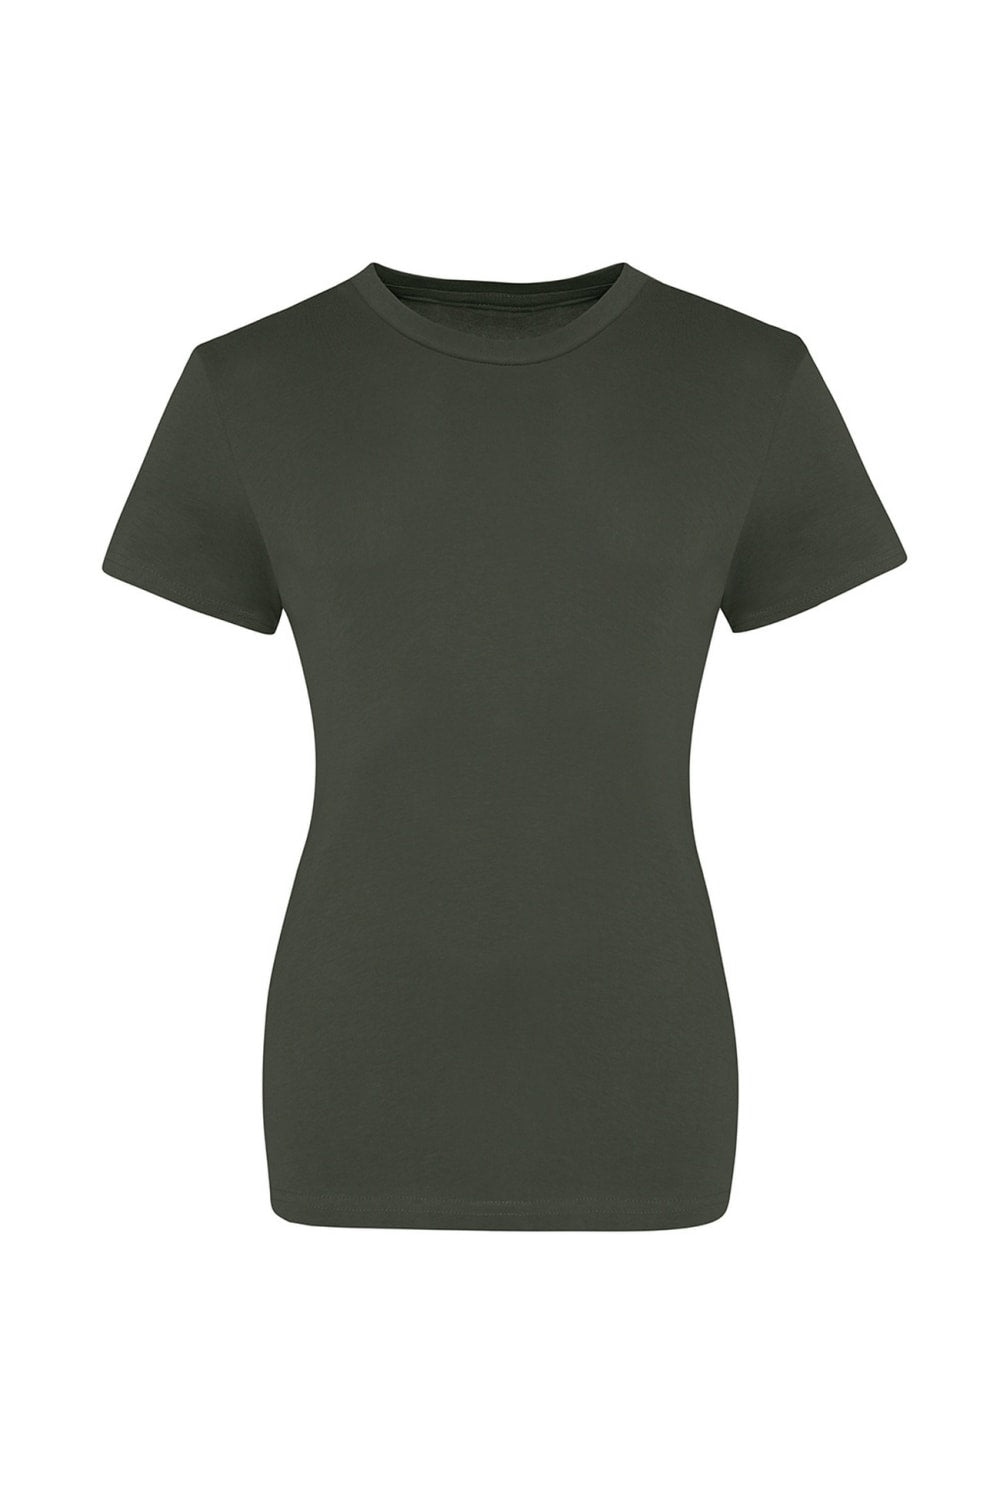 AWDis Just Ts Womens/Ladies The 100 Girlie T-Shirt (Combat Green)